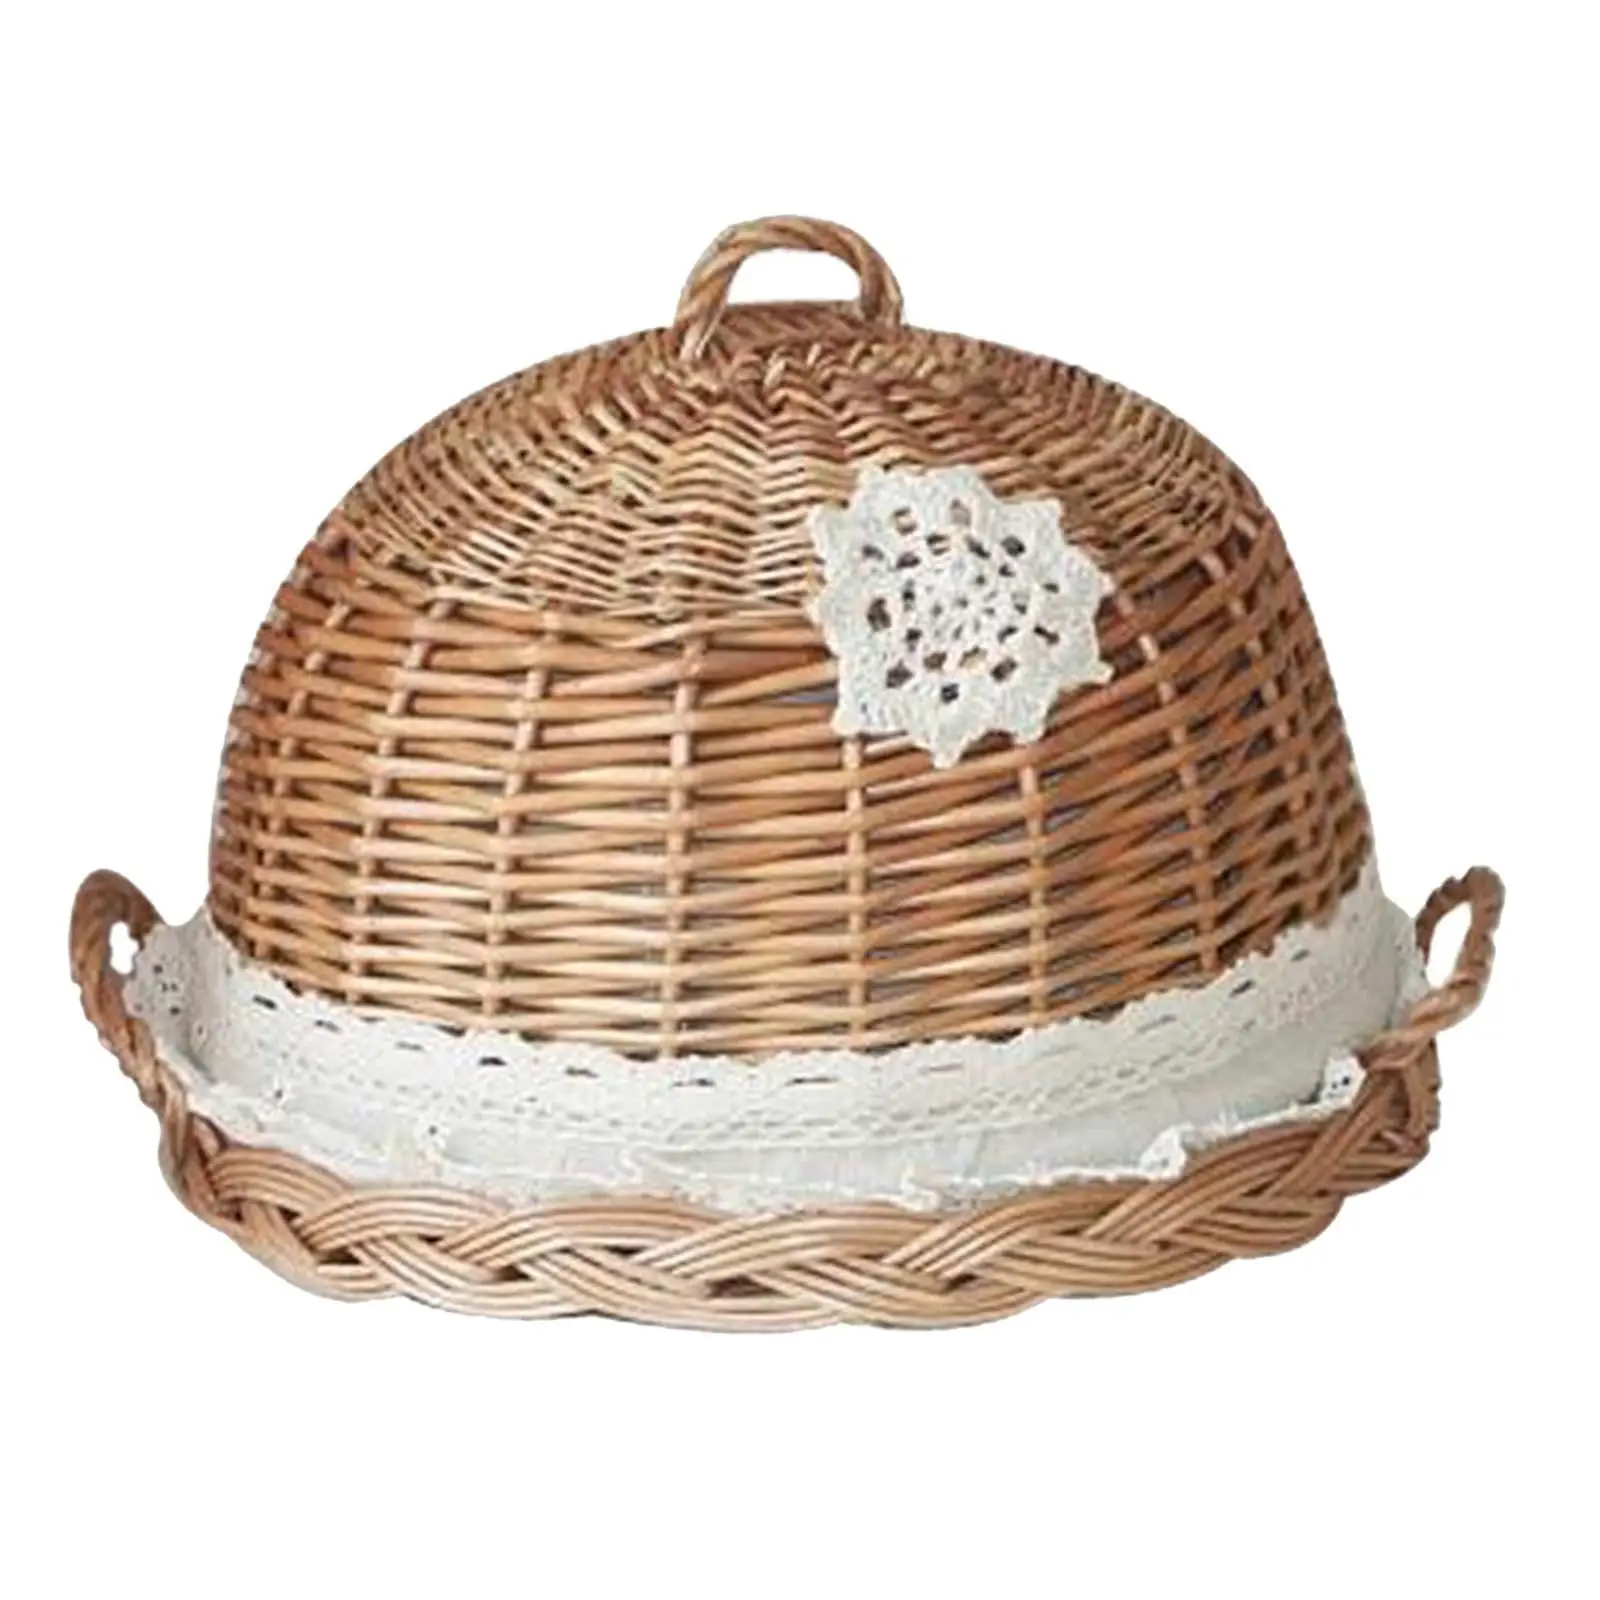 Food Dome Lid and Serving Tray Rattan Wicker Woven Brown Round Lightweight Kitchen Decoration Handcrafted 30CX20cm with Handles